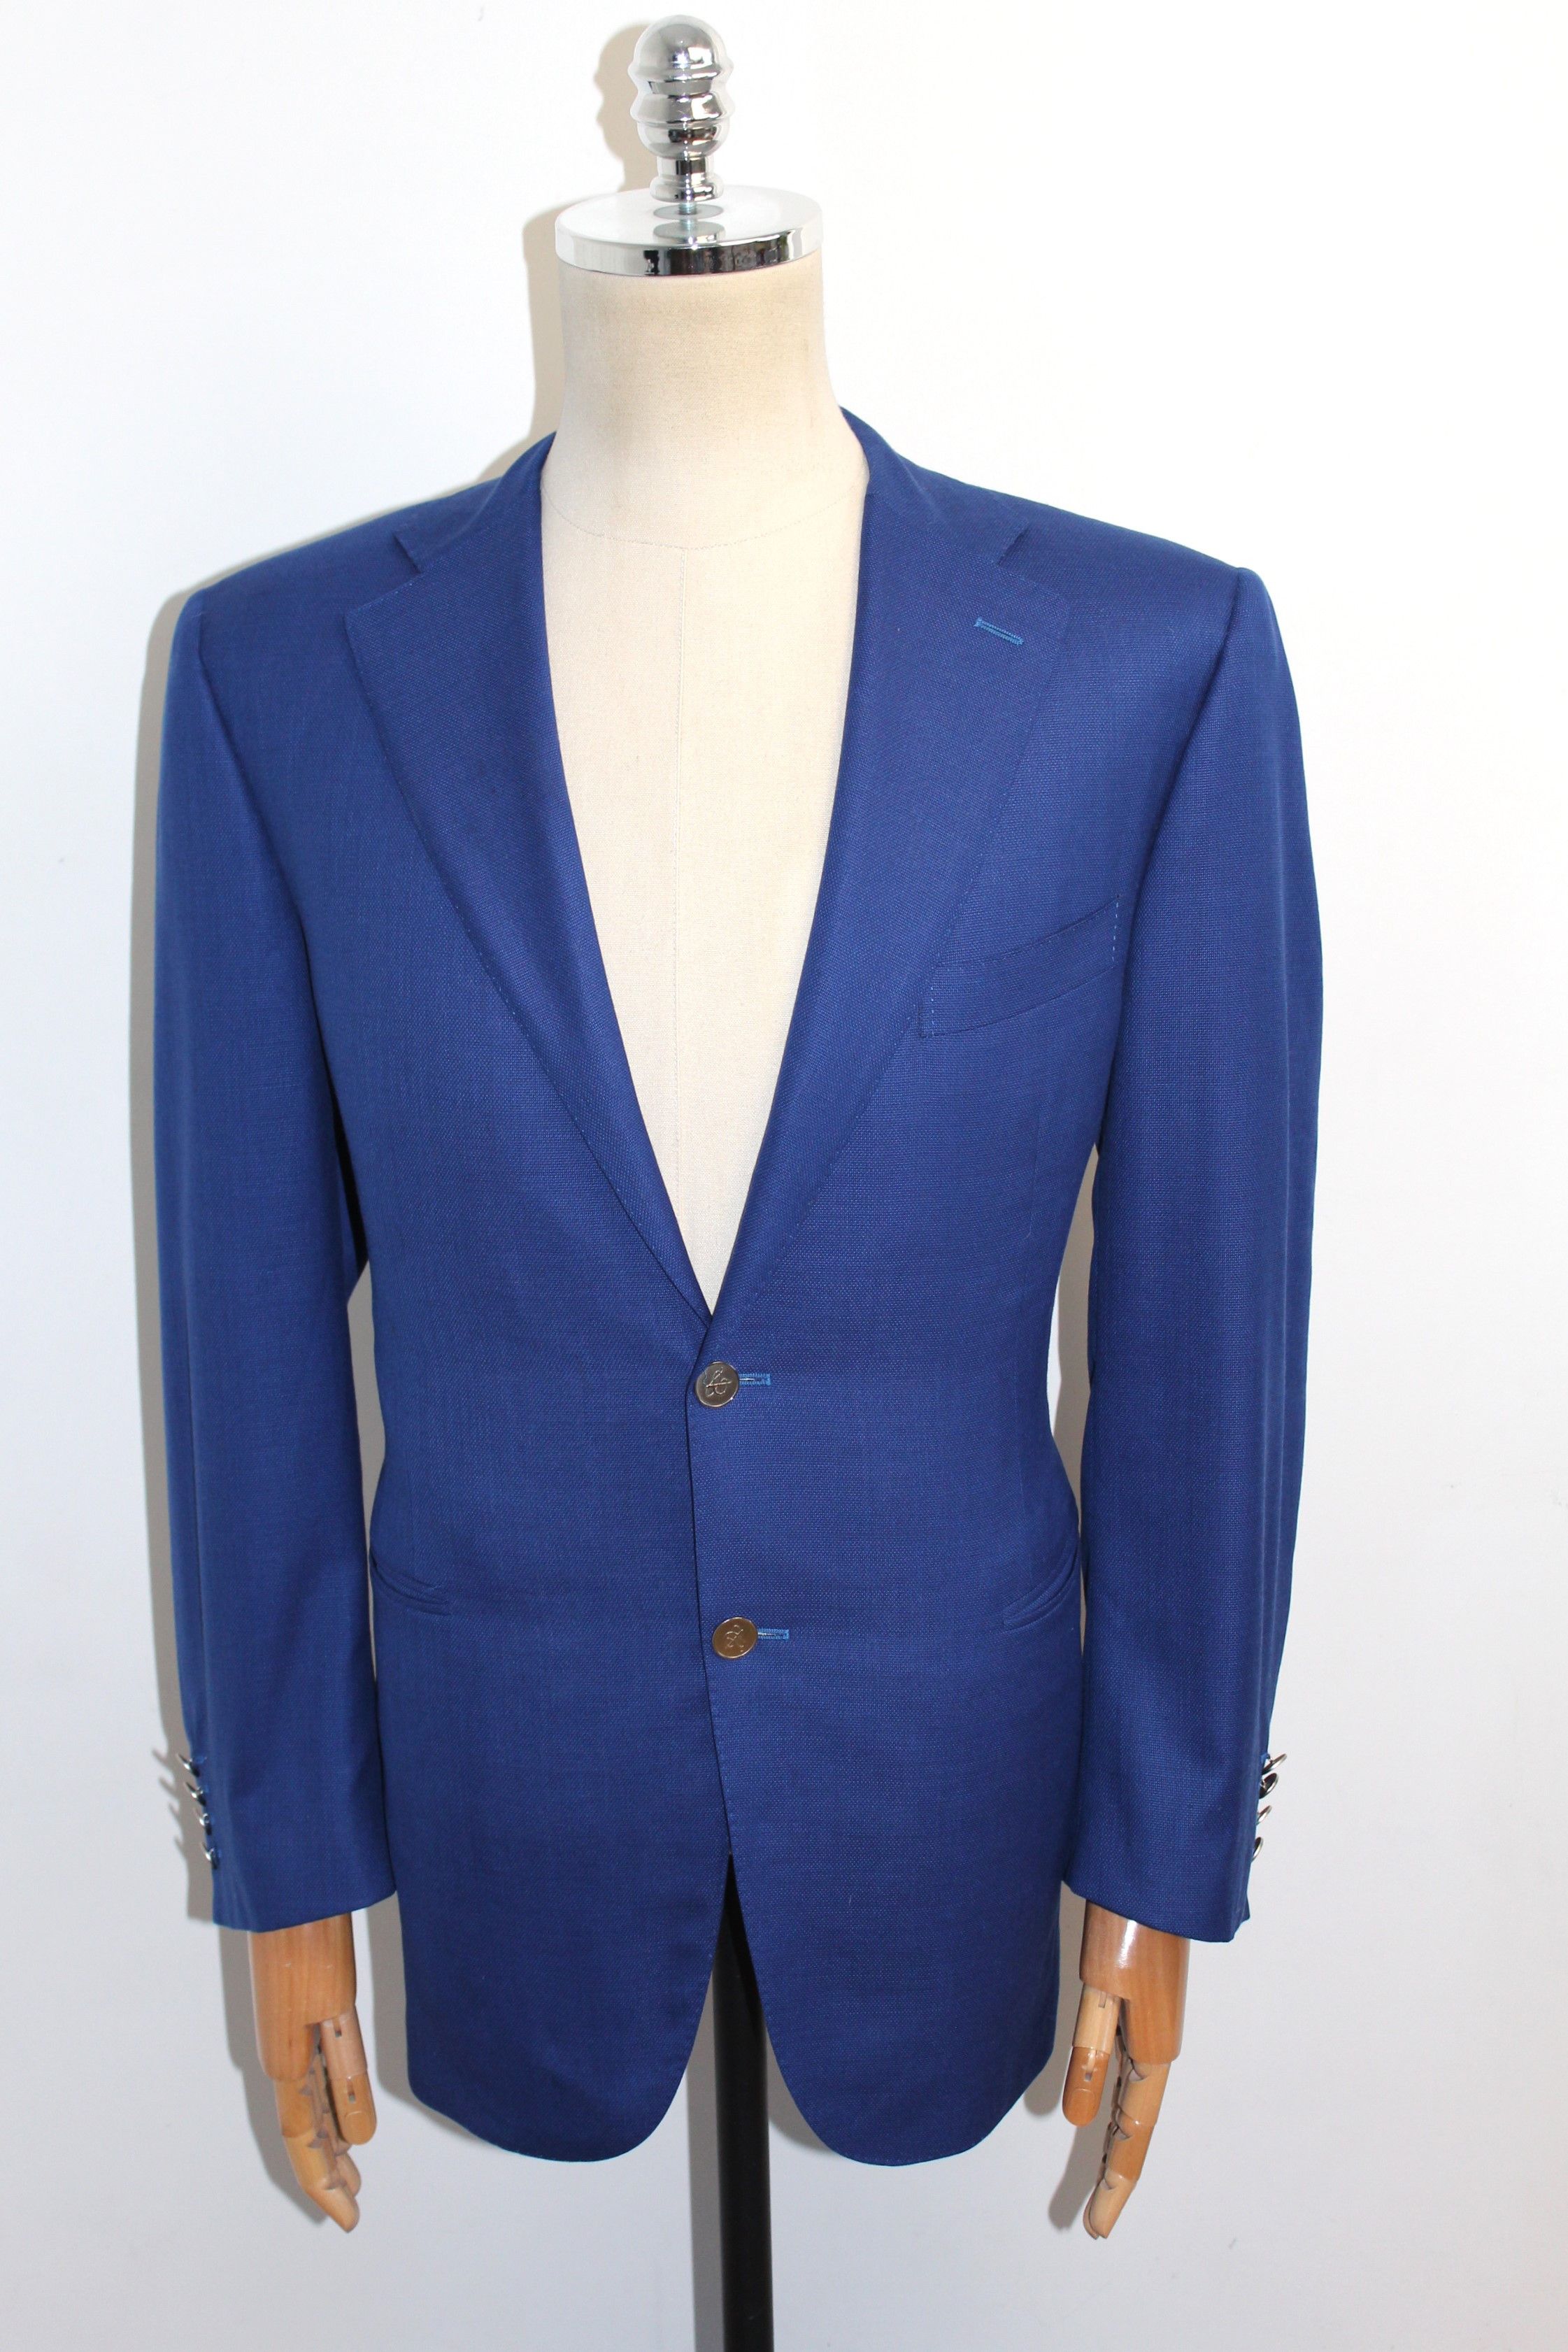 Canali CANALI Travel Water Resistant Blue Blazer Jacket Size 52 | Grailed